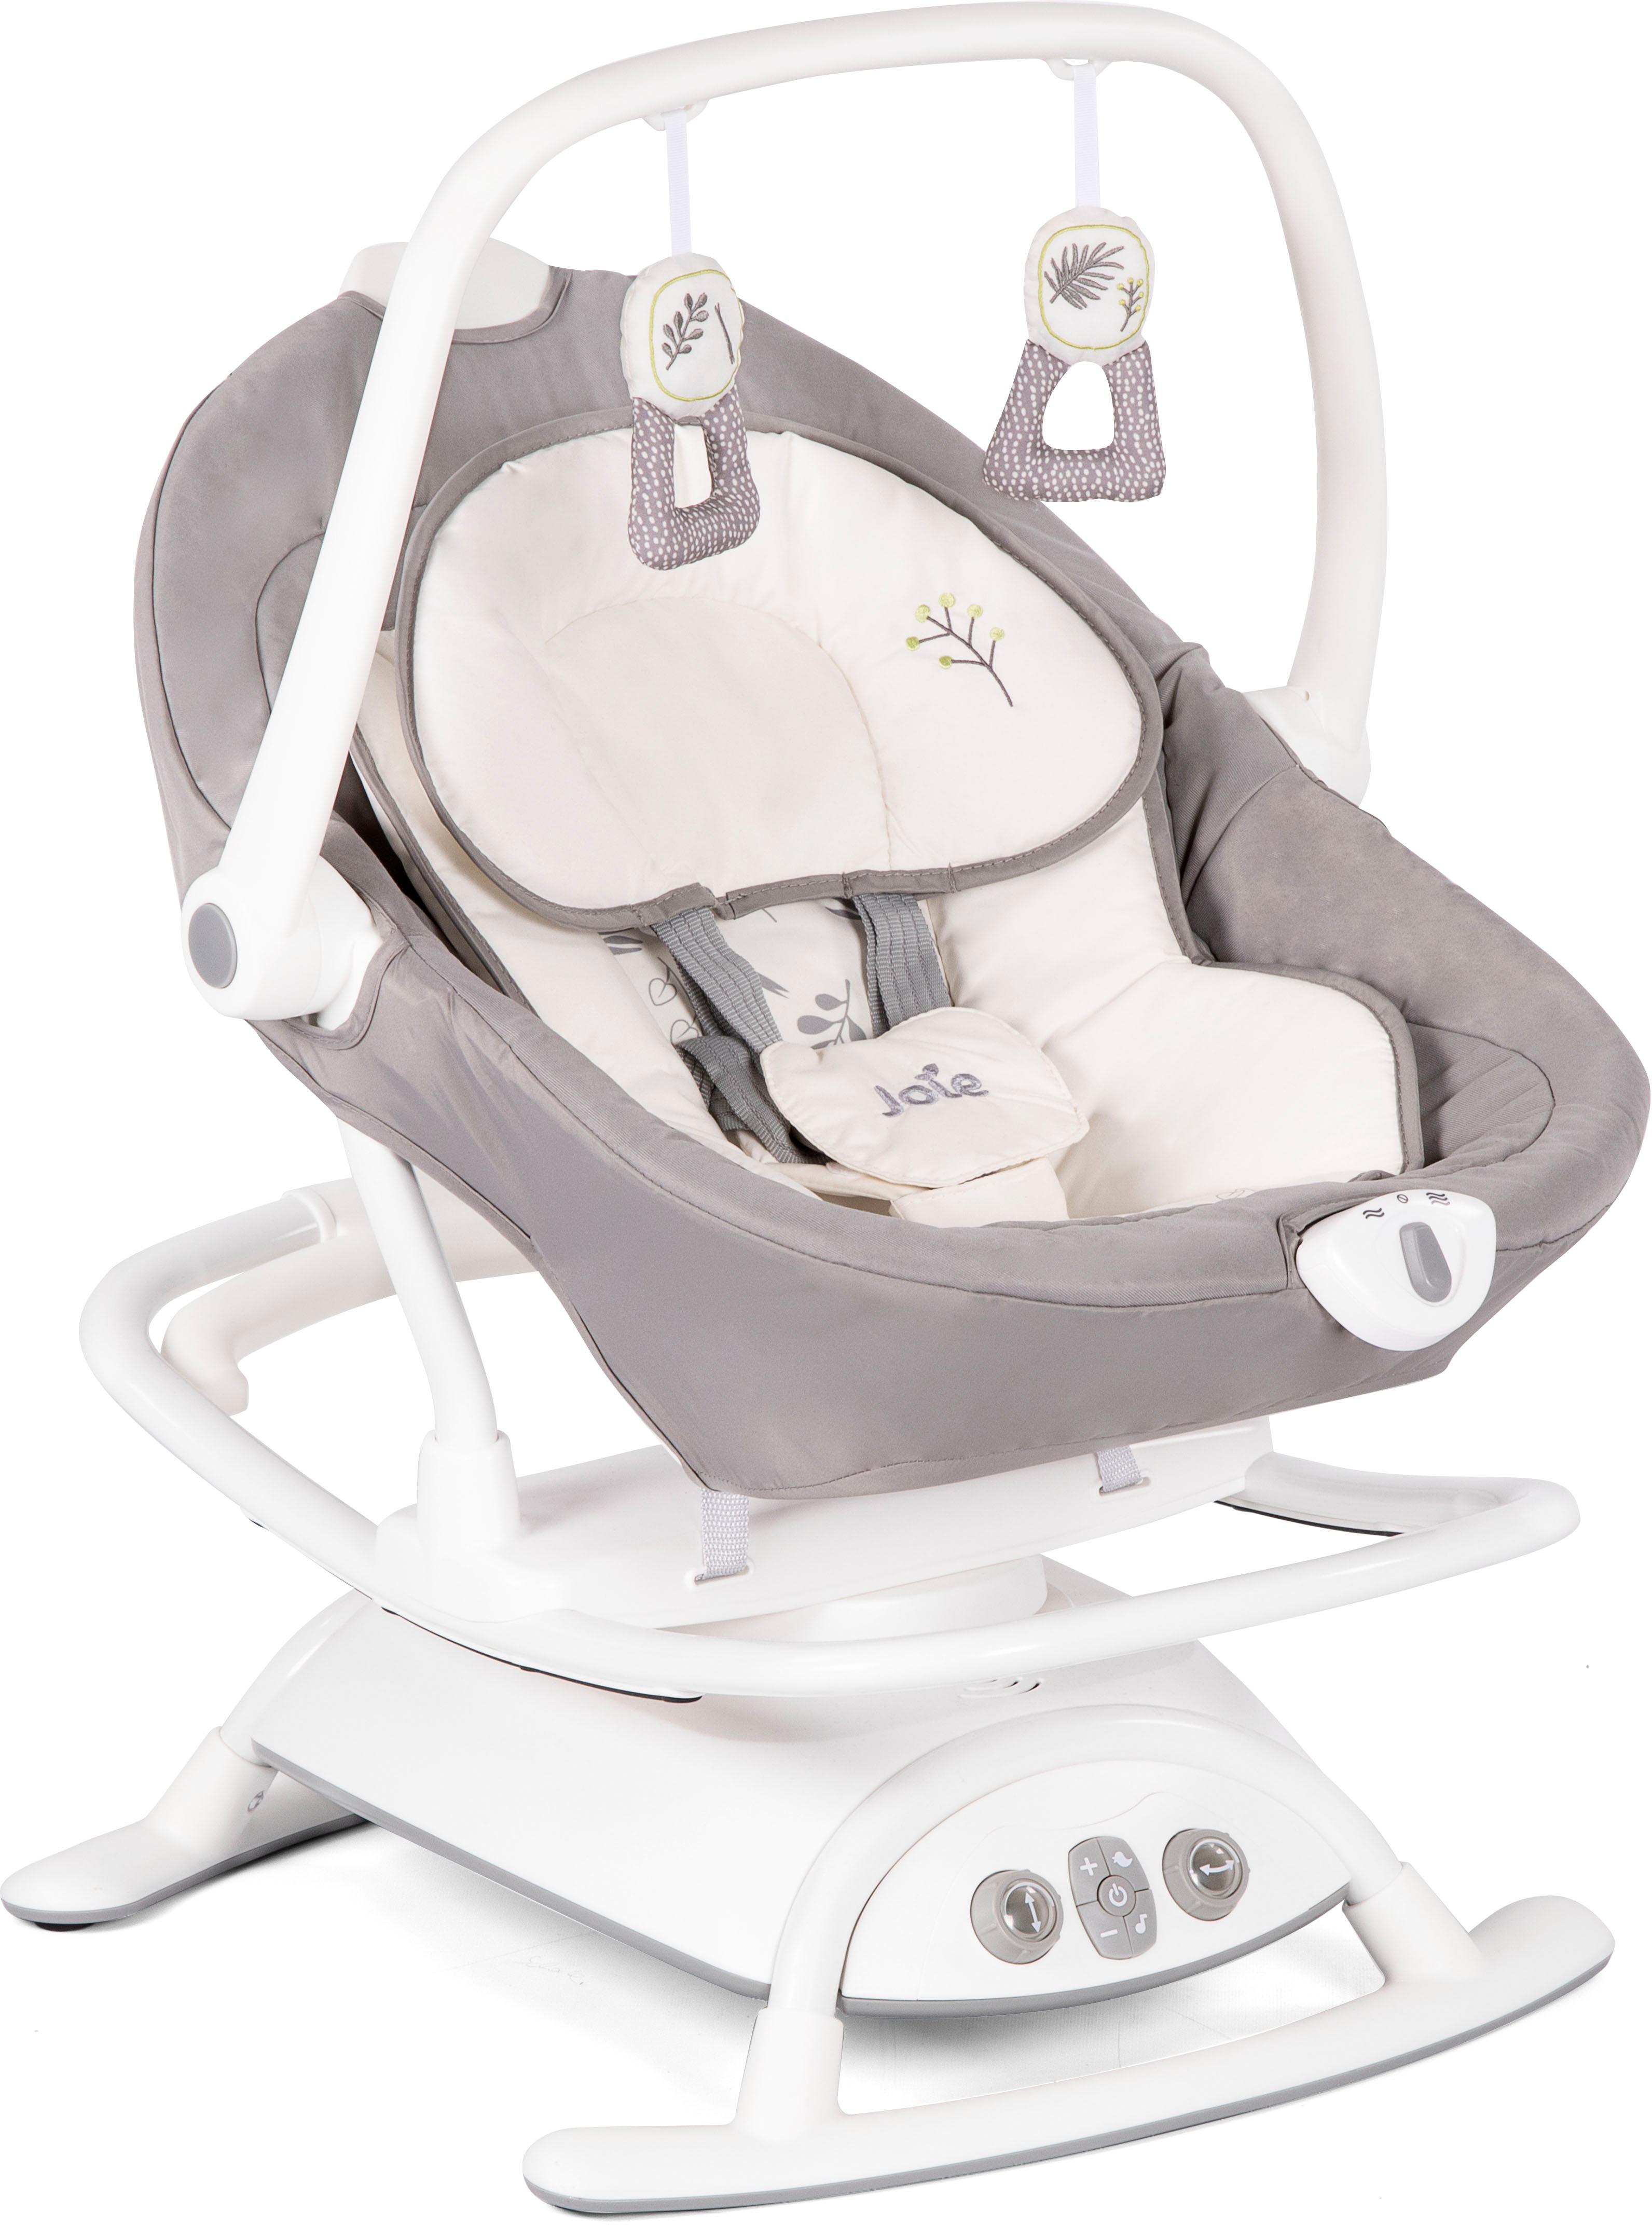 Joie Sansa 2 In 1 Bouncer With Stand - Fern